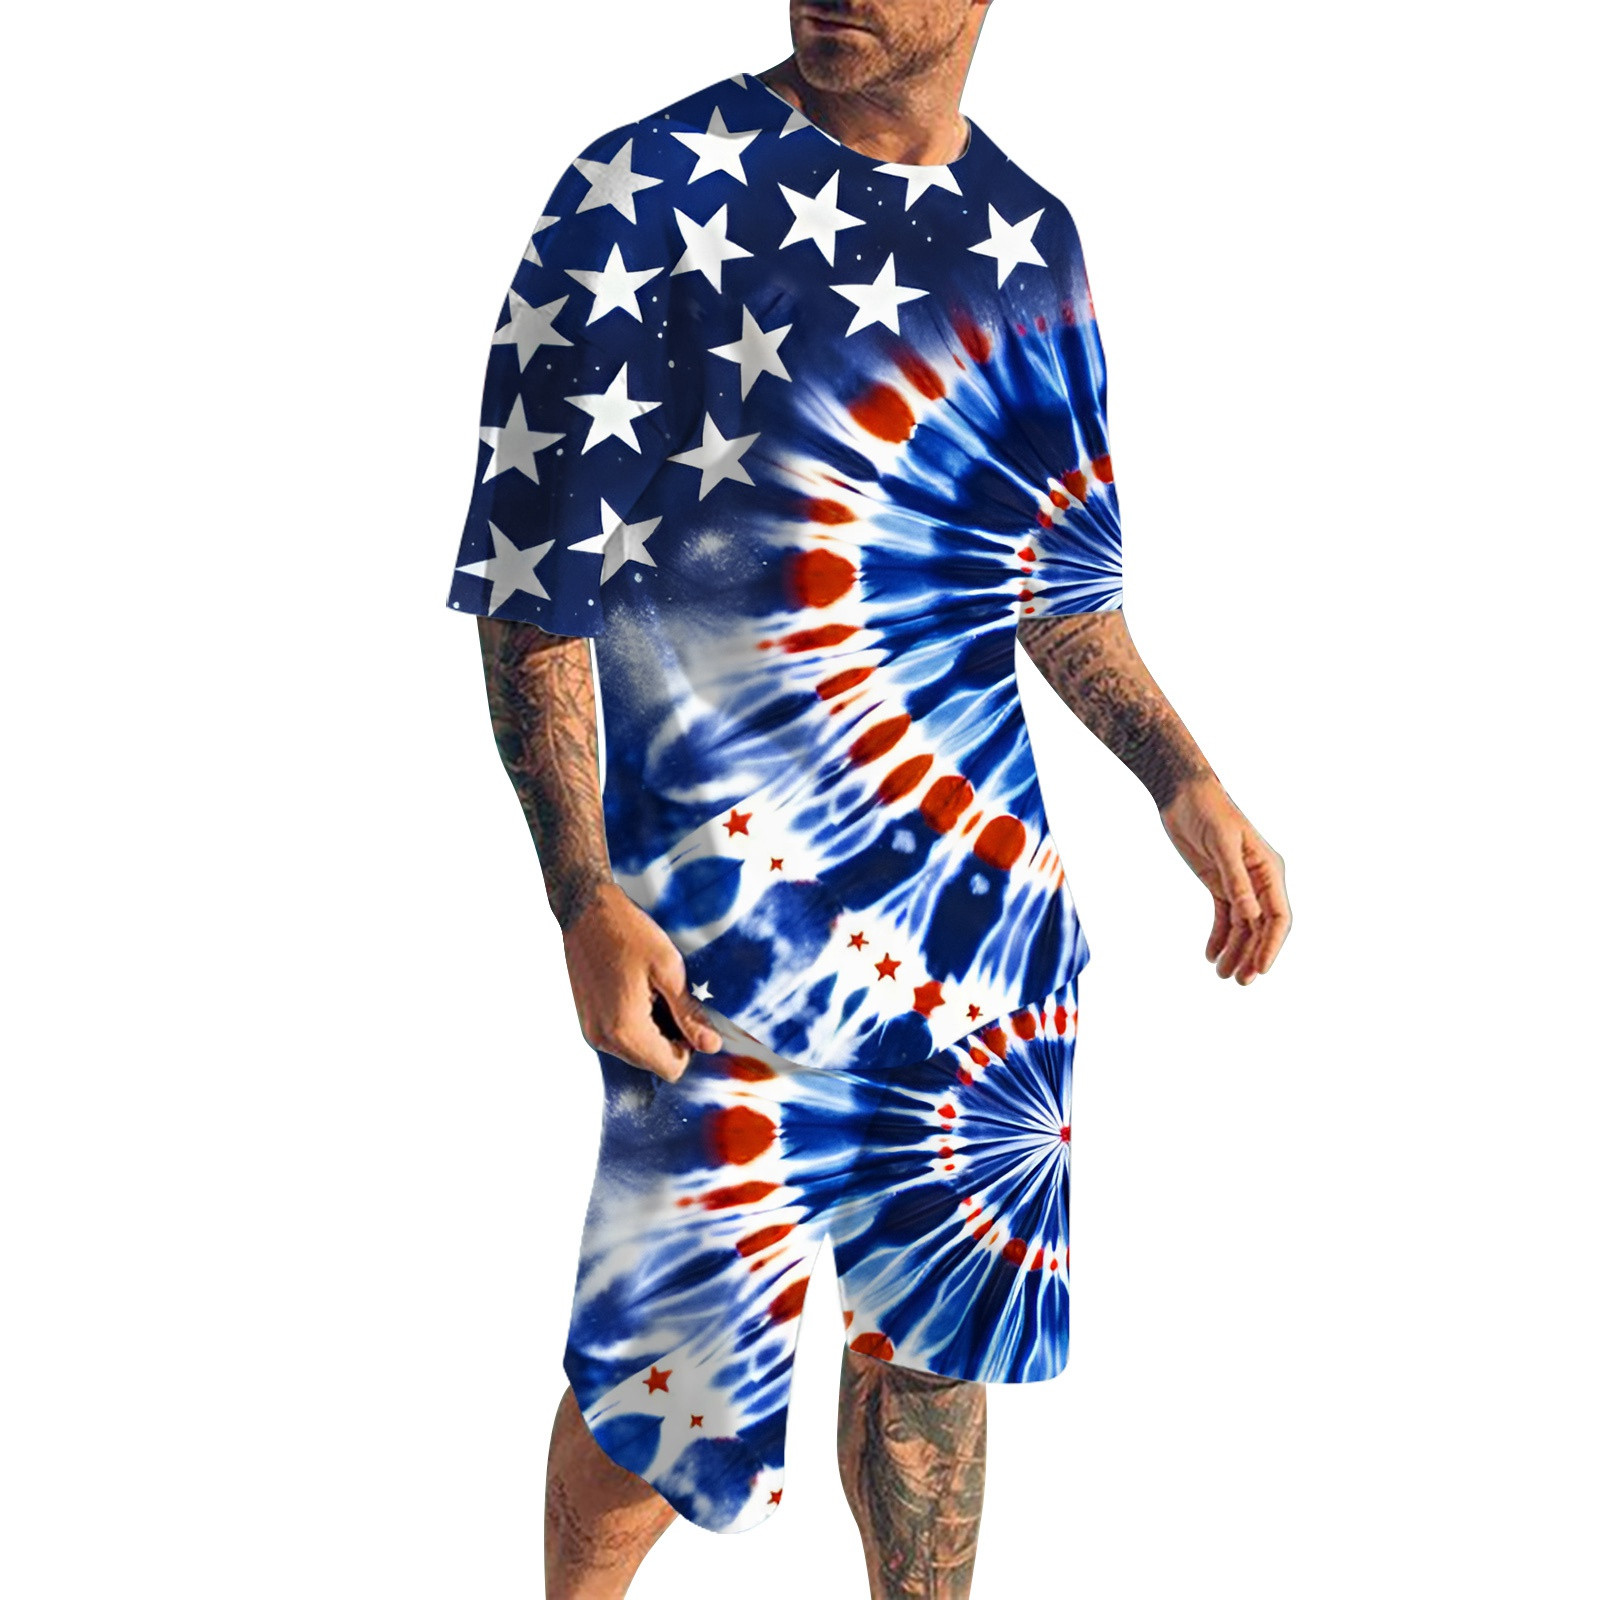 YANG Mens 2 Piece Outfits Patriotic Sets 4th of July Muscle Tee Shirts ...